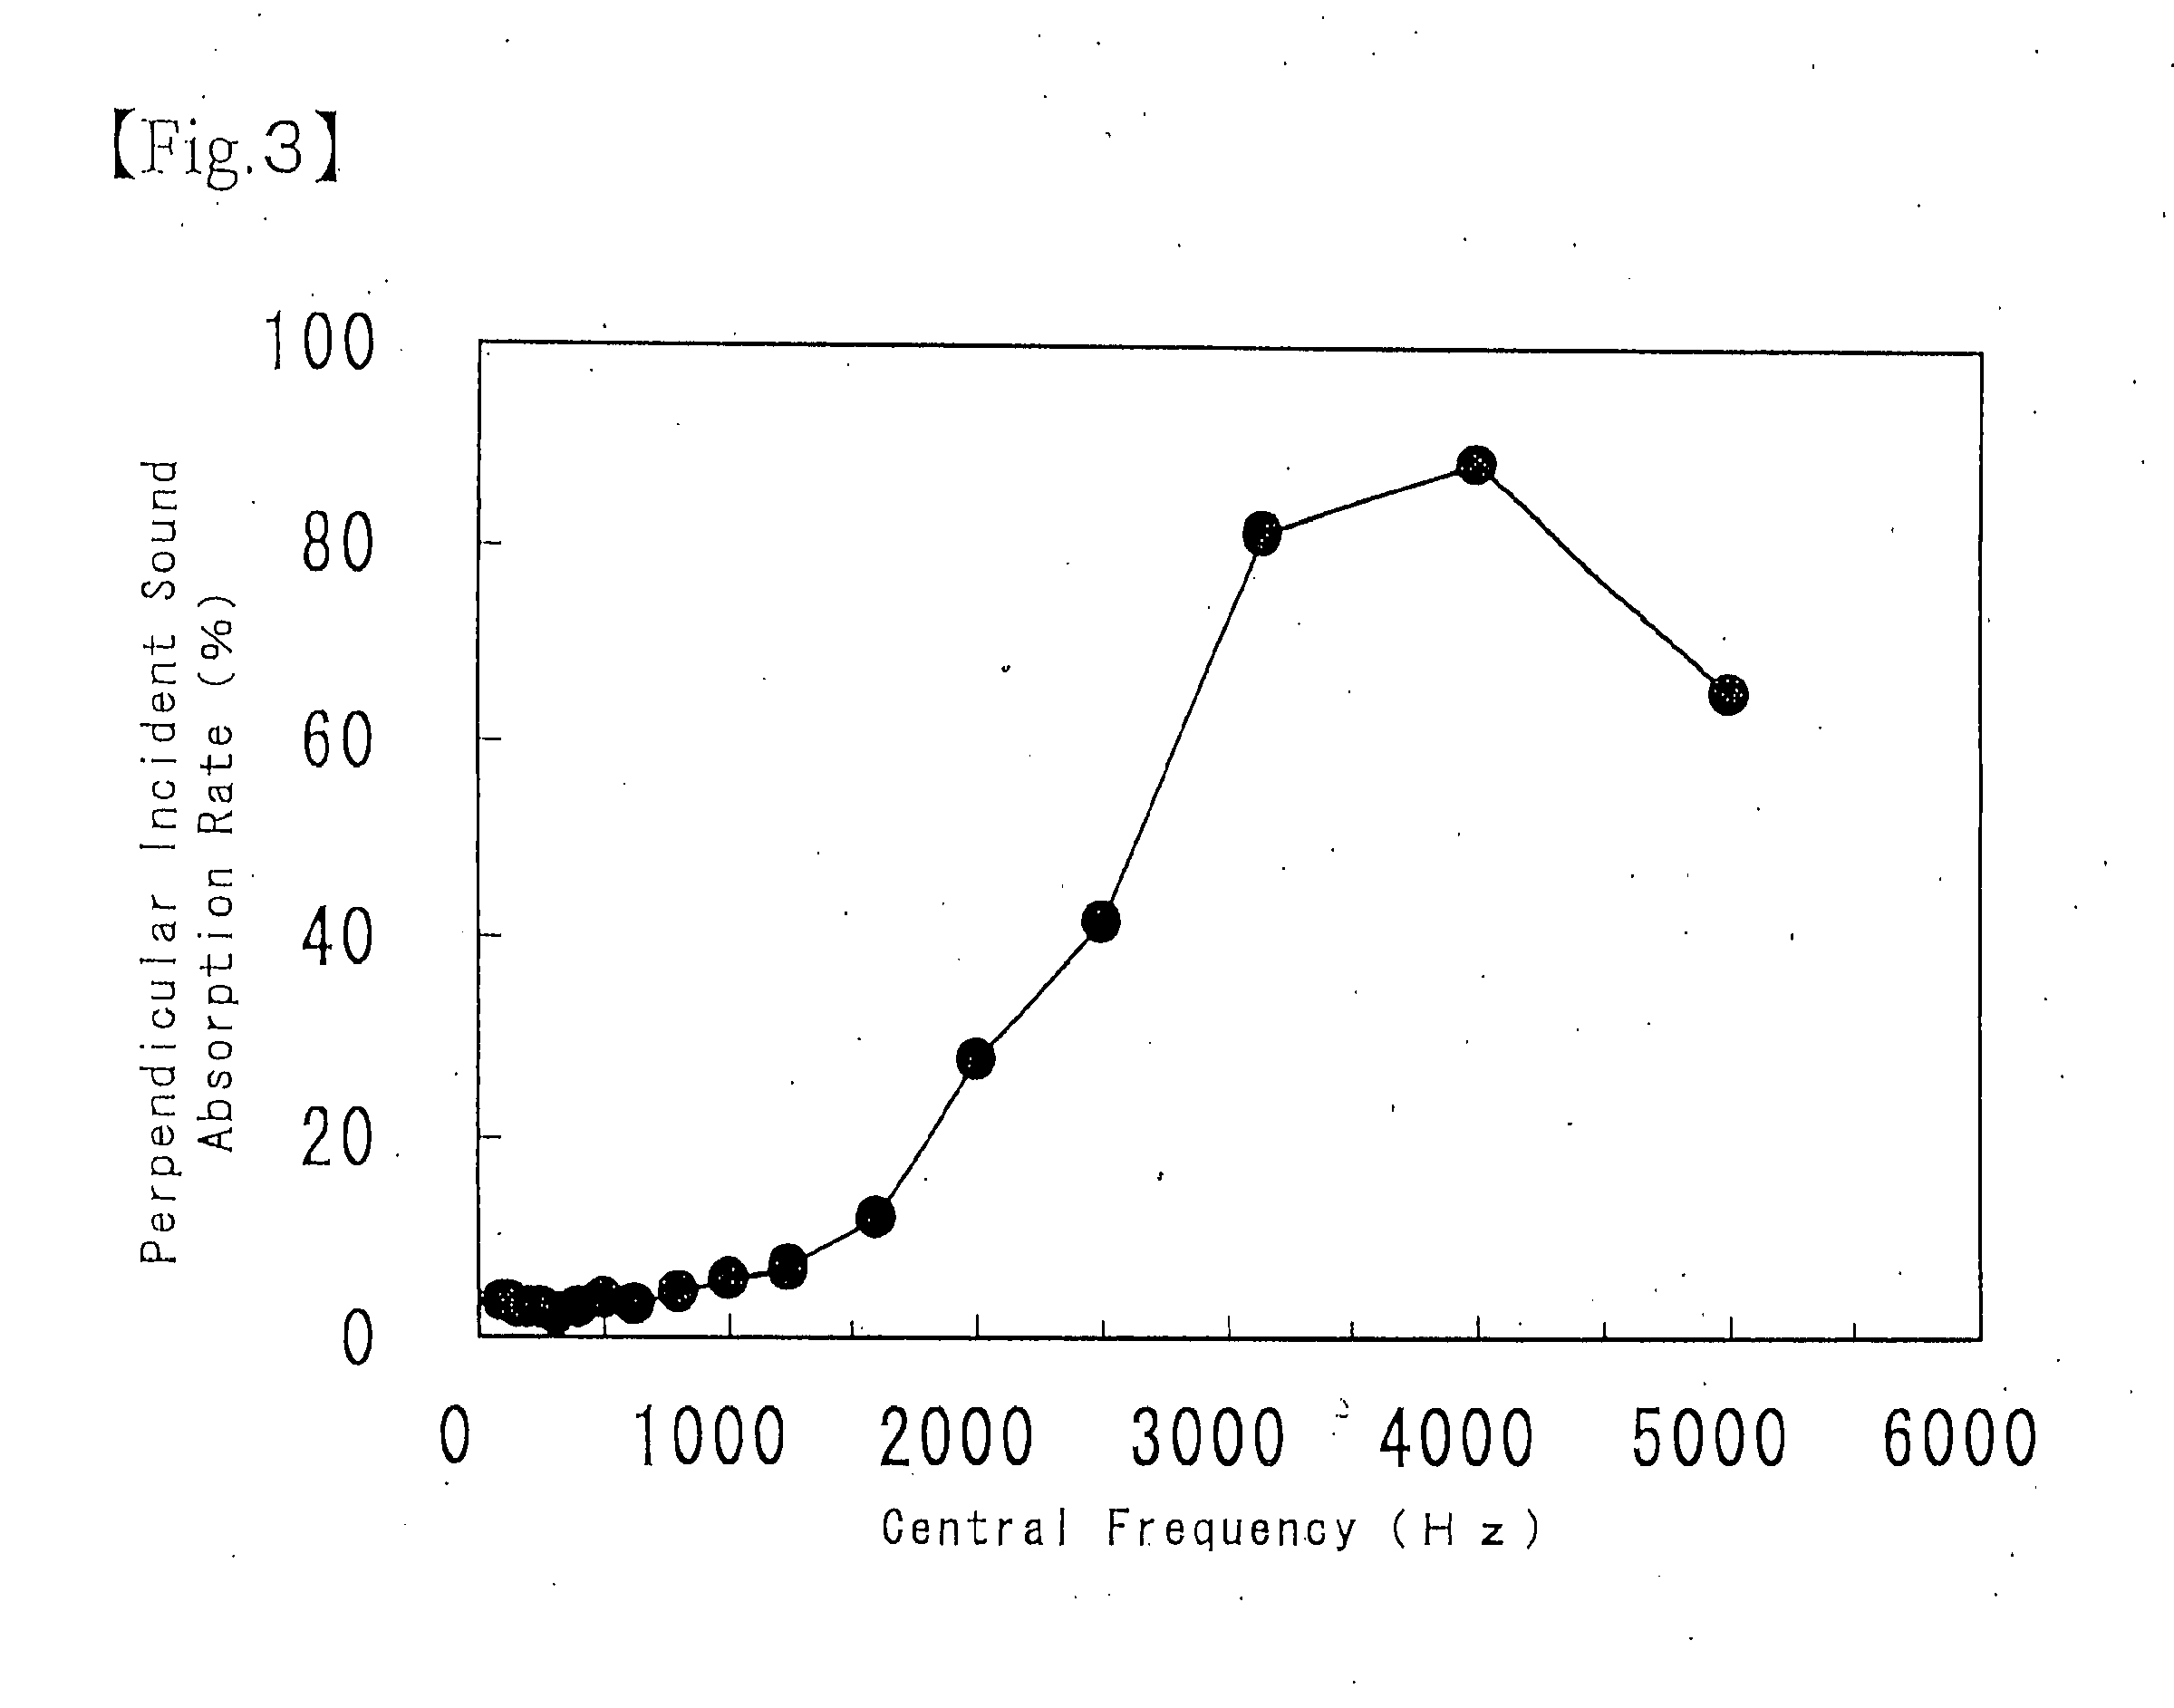 Process for producing spongelike structure